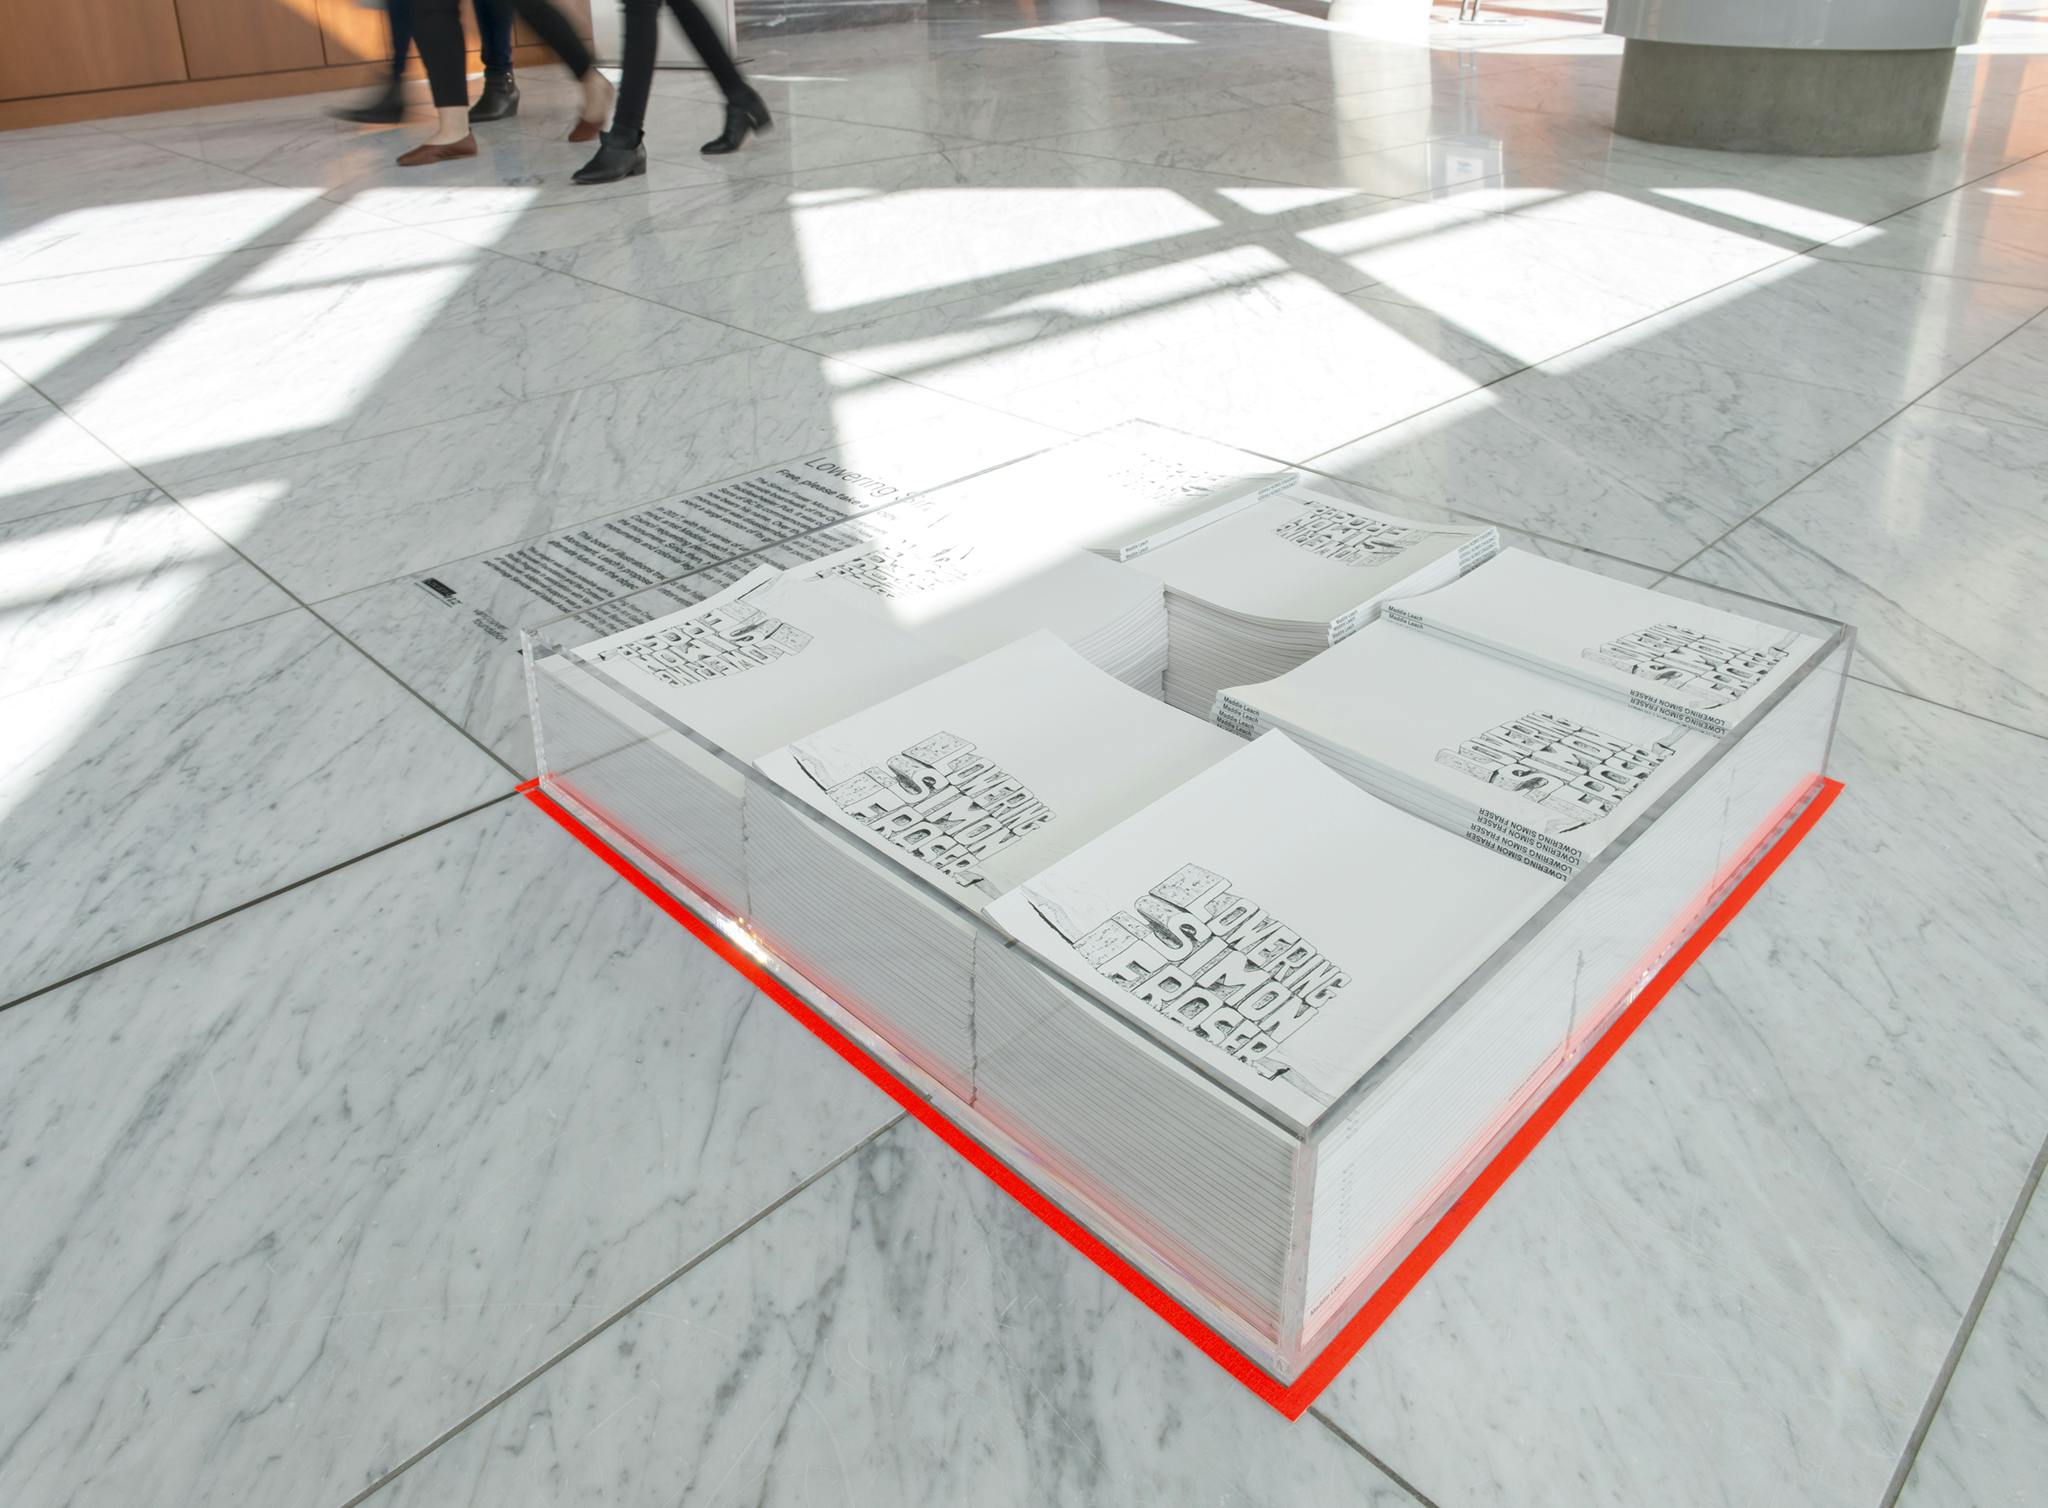 A clear display case with multiple stacks of books sits directly on a marble floor. The book cover reads “Lowering Simon Fraser” in illustrated text. The case is outlined with neon orange tape. 